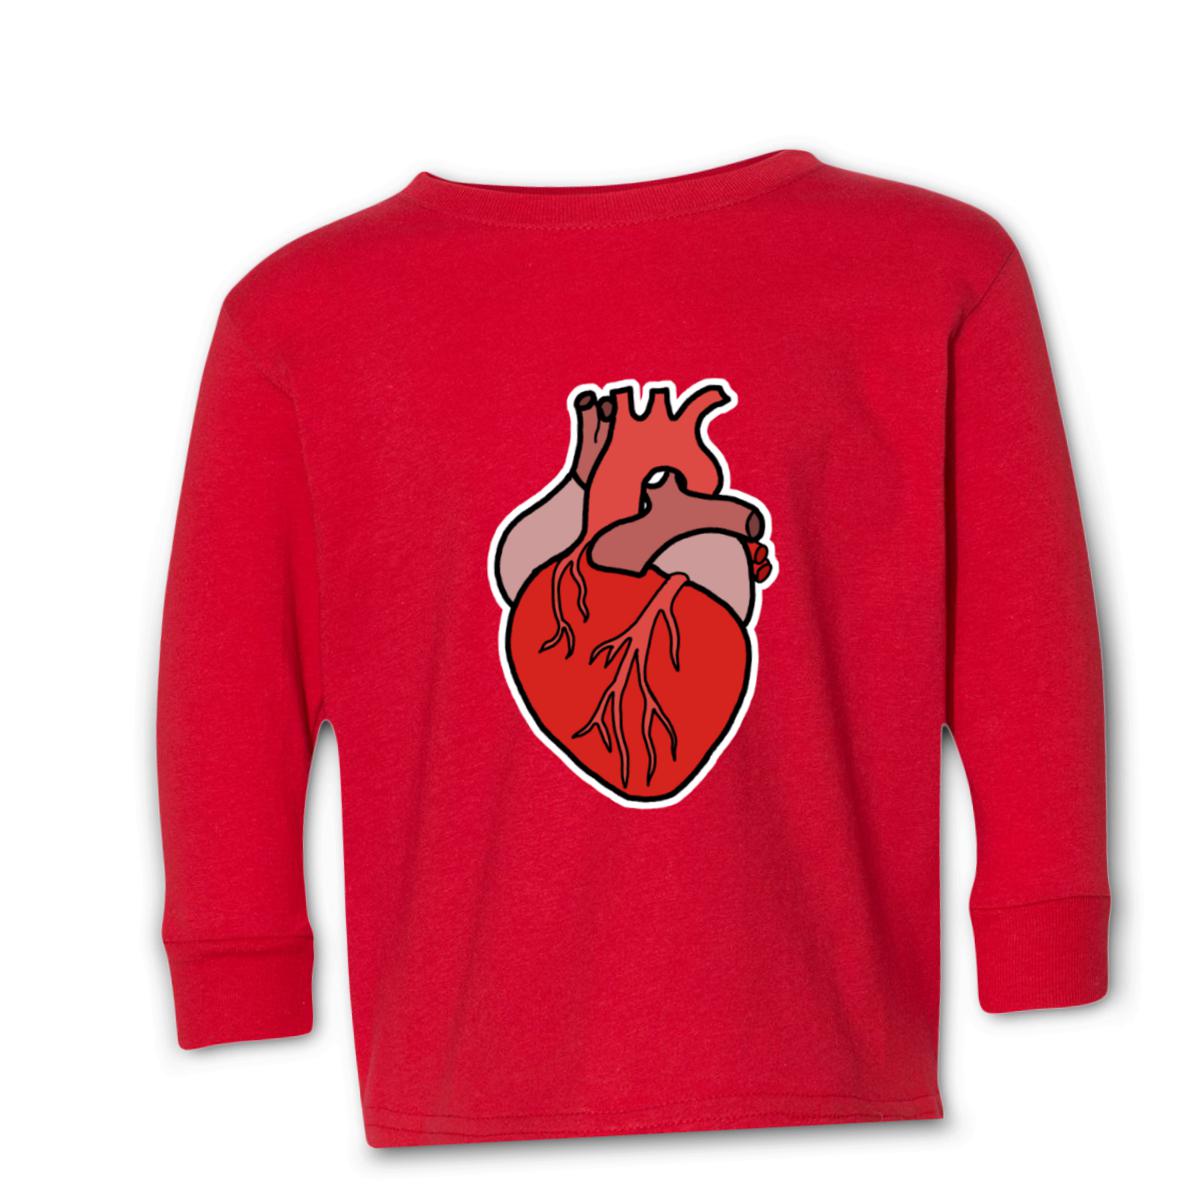 Illustrative Heart Toddler Long Sleeve Tee 4T red